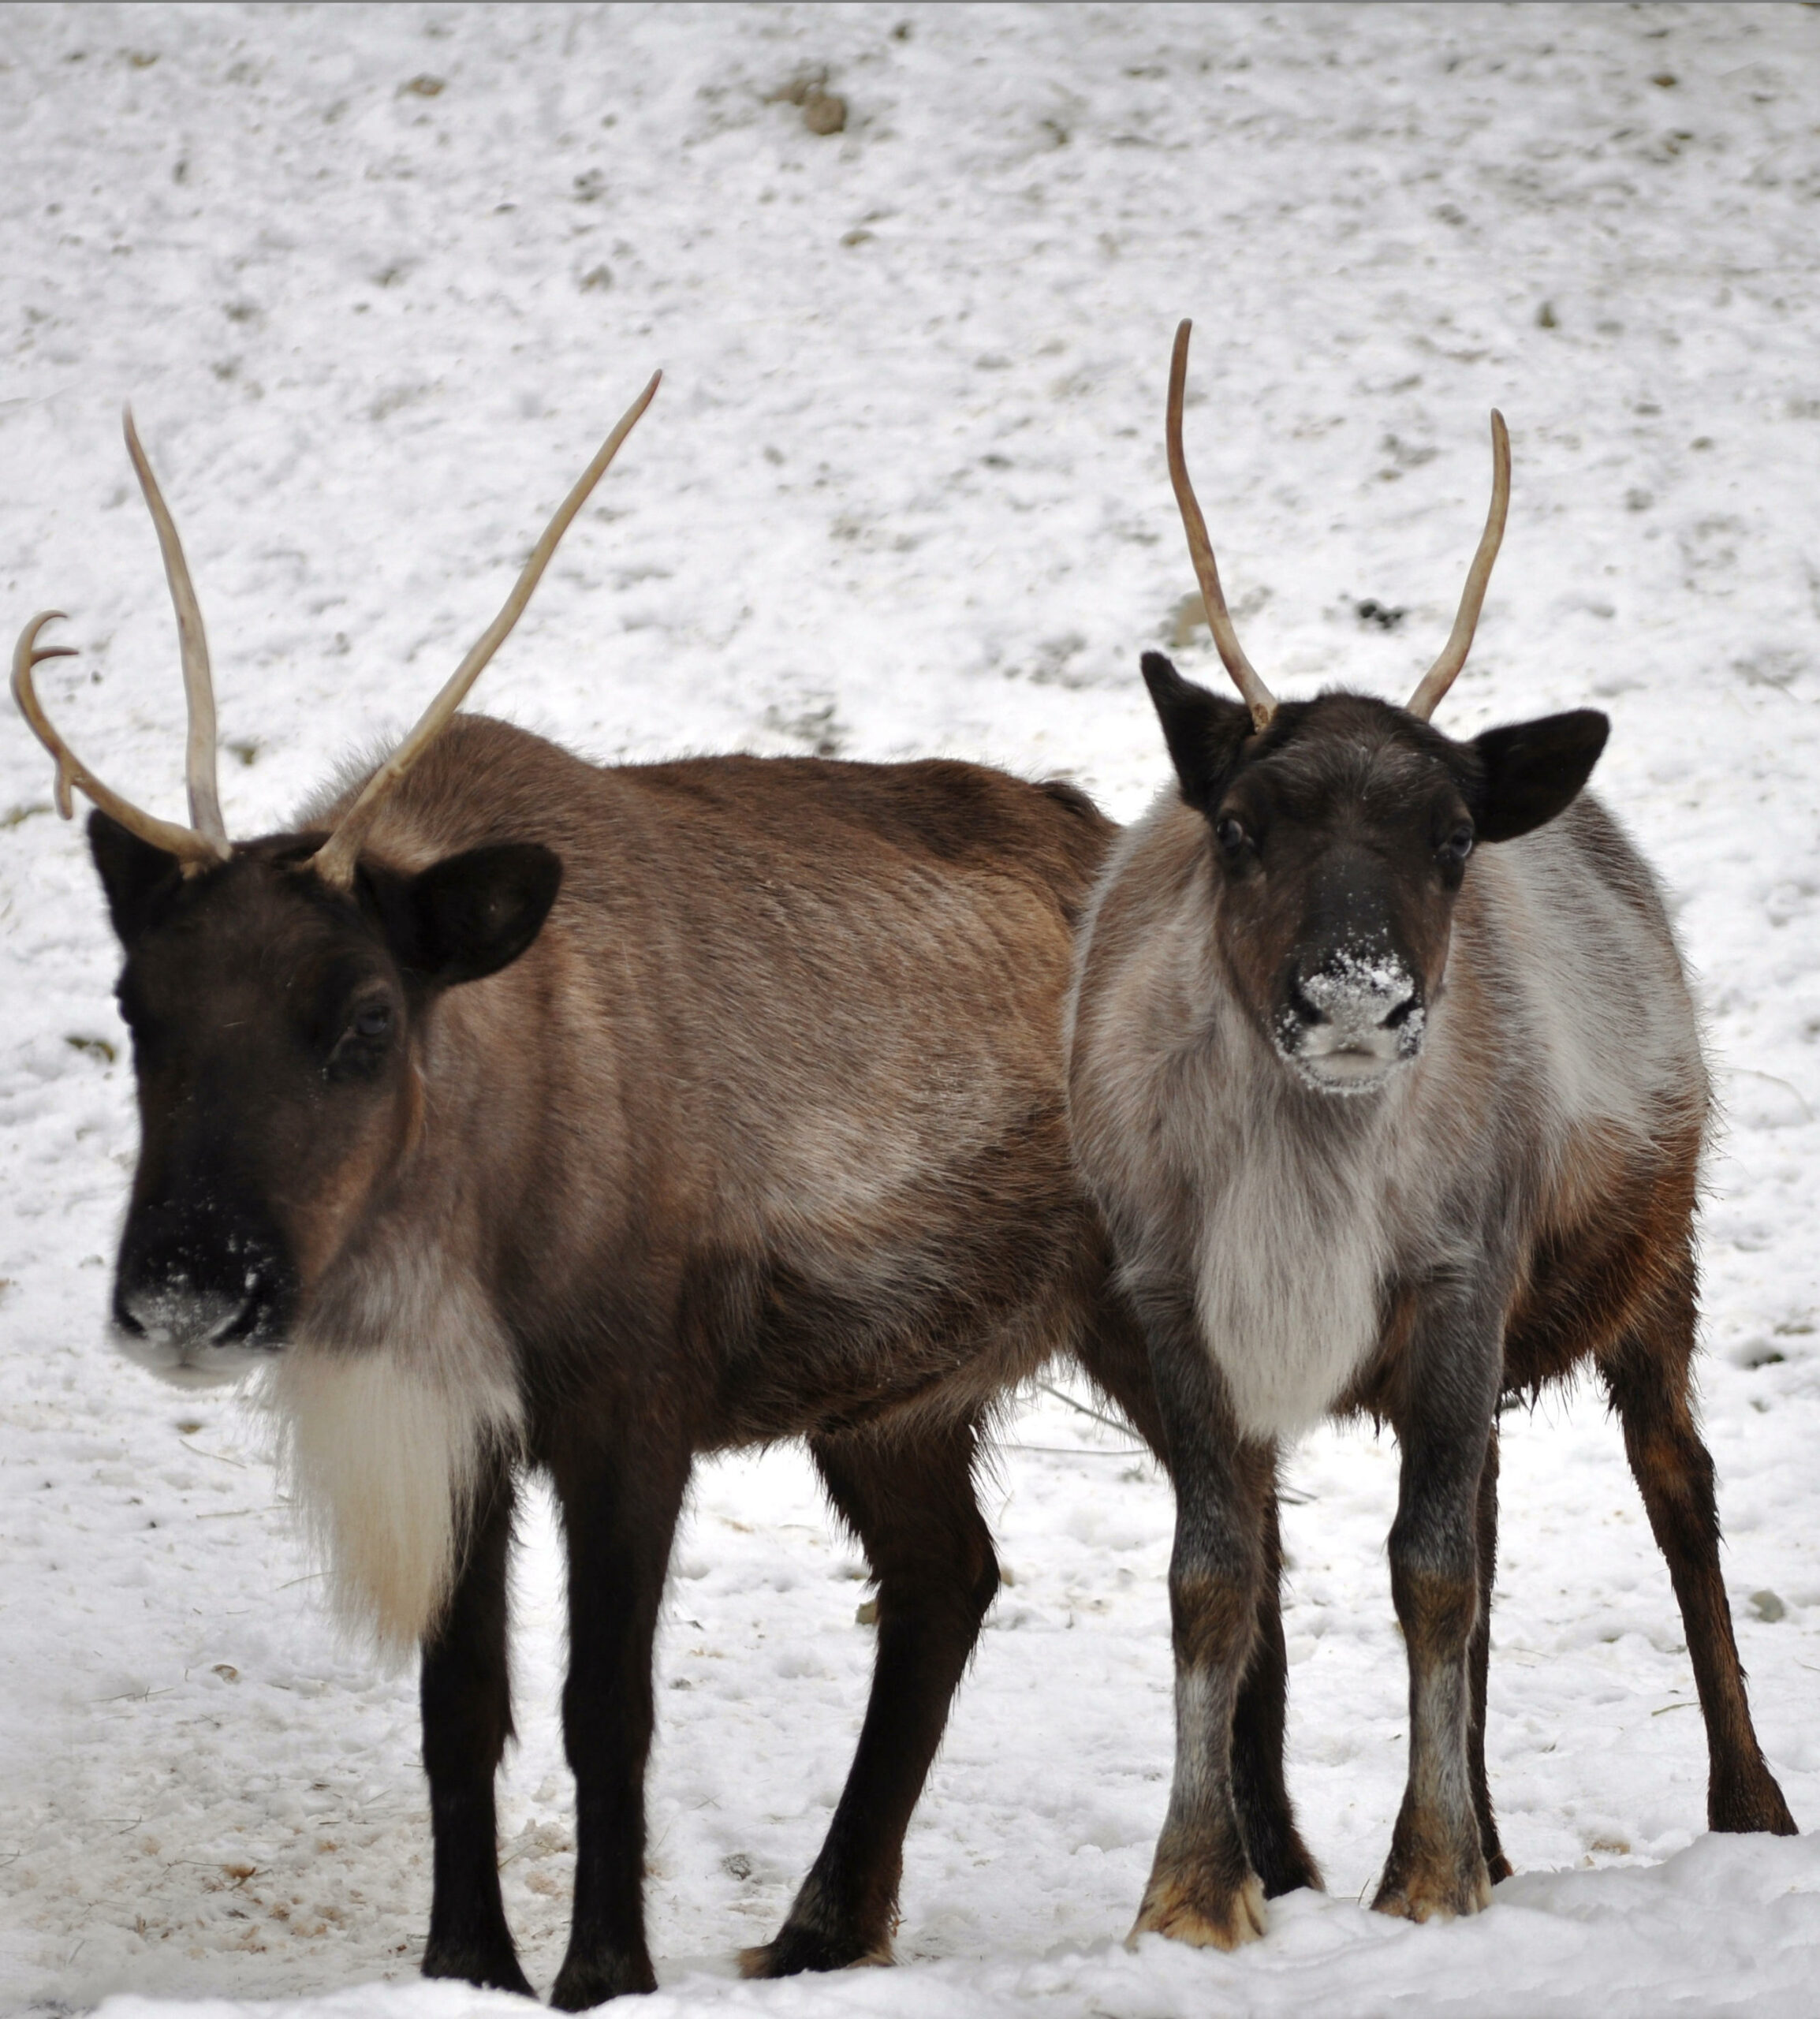 two reindeer standing together in snow